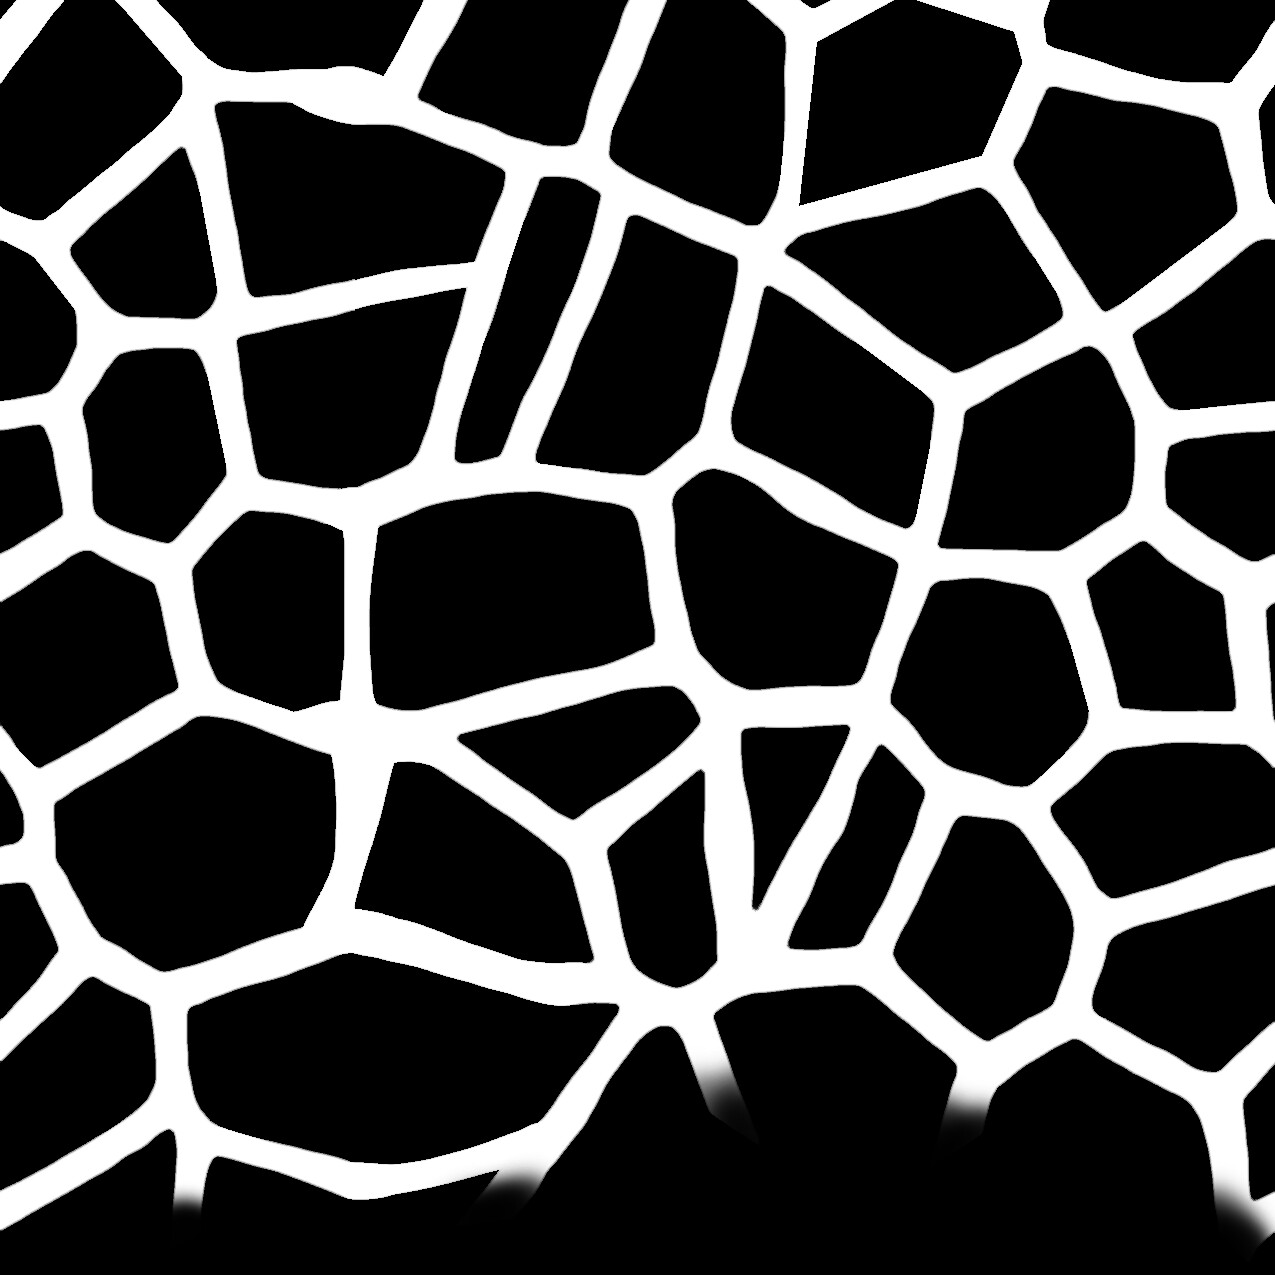 Voronoi texture, created in Illustrator and touched up in Photoshop; script used is mentioned in description.